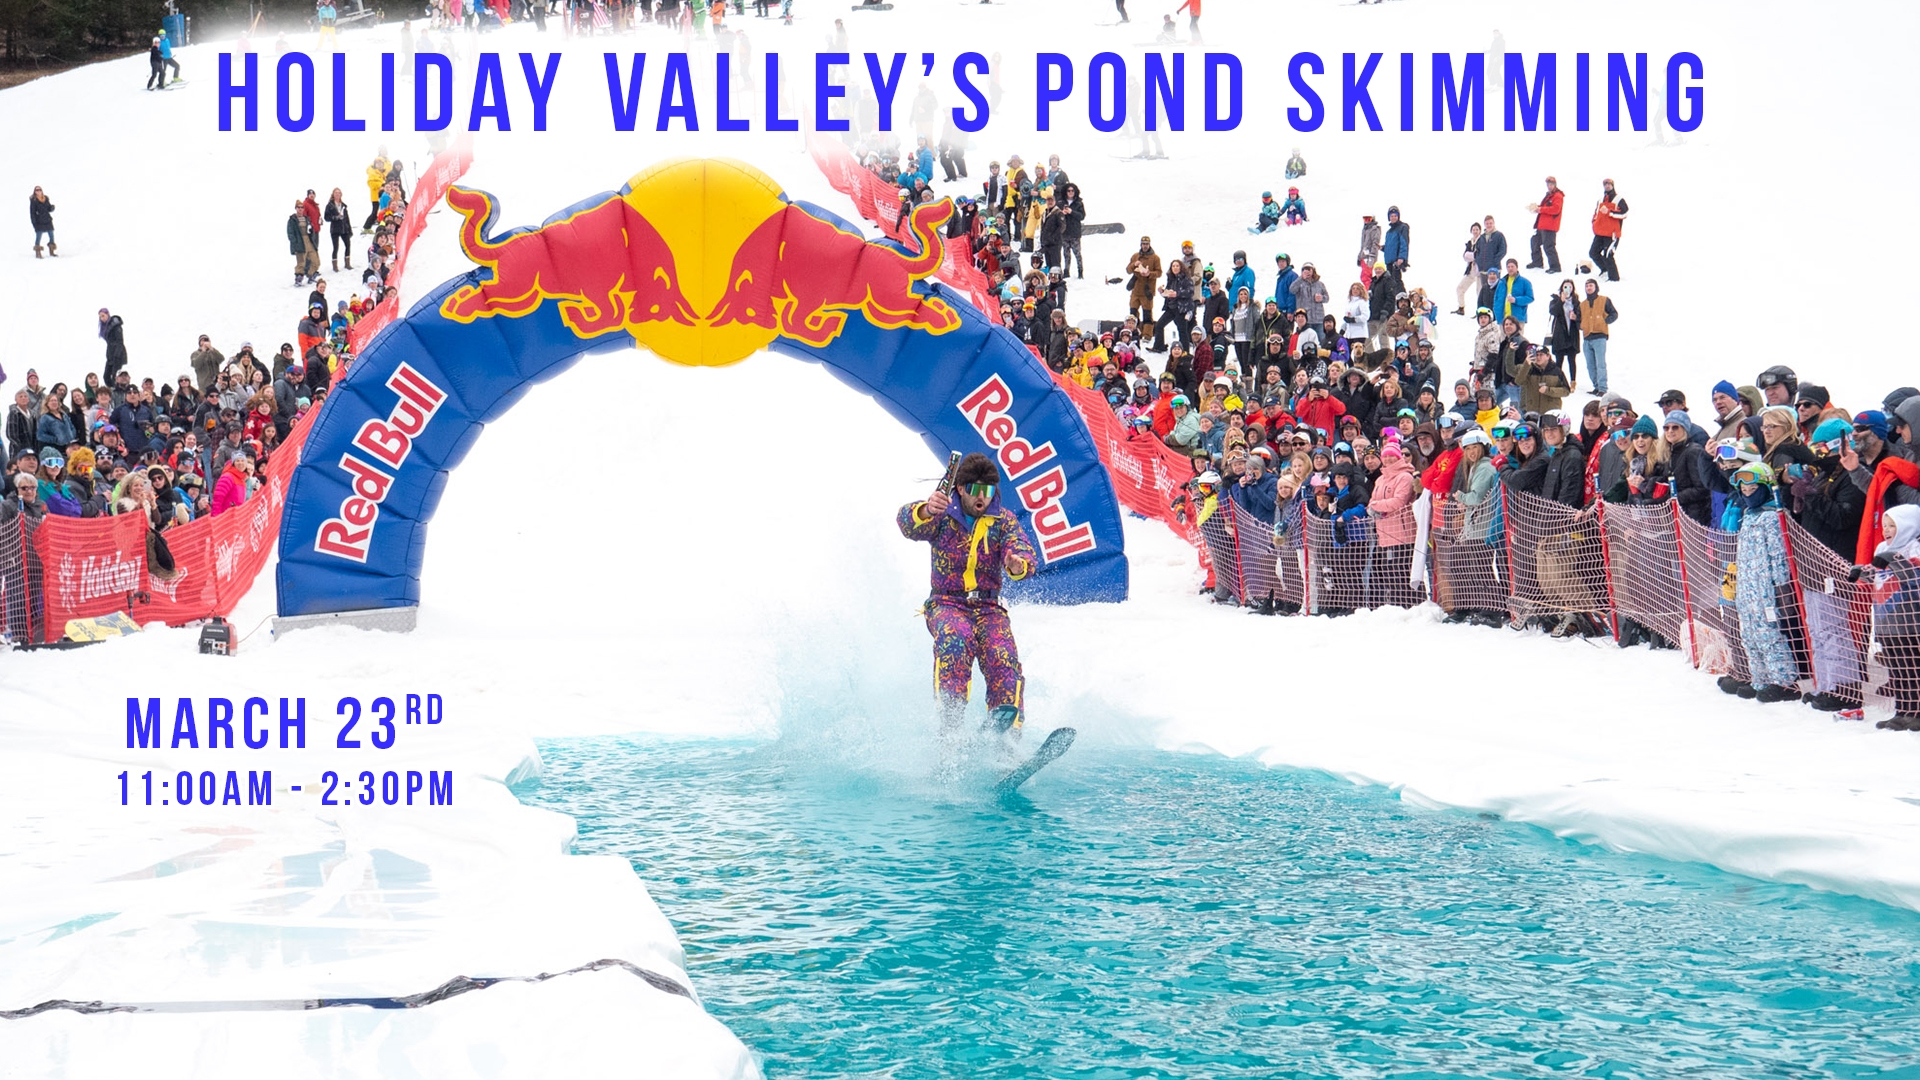 Holiday Valley Pond Skimming March 23rd